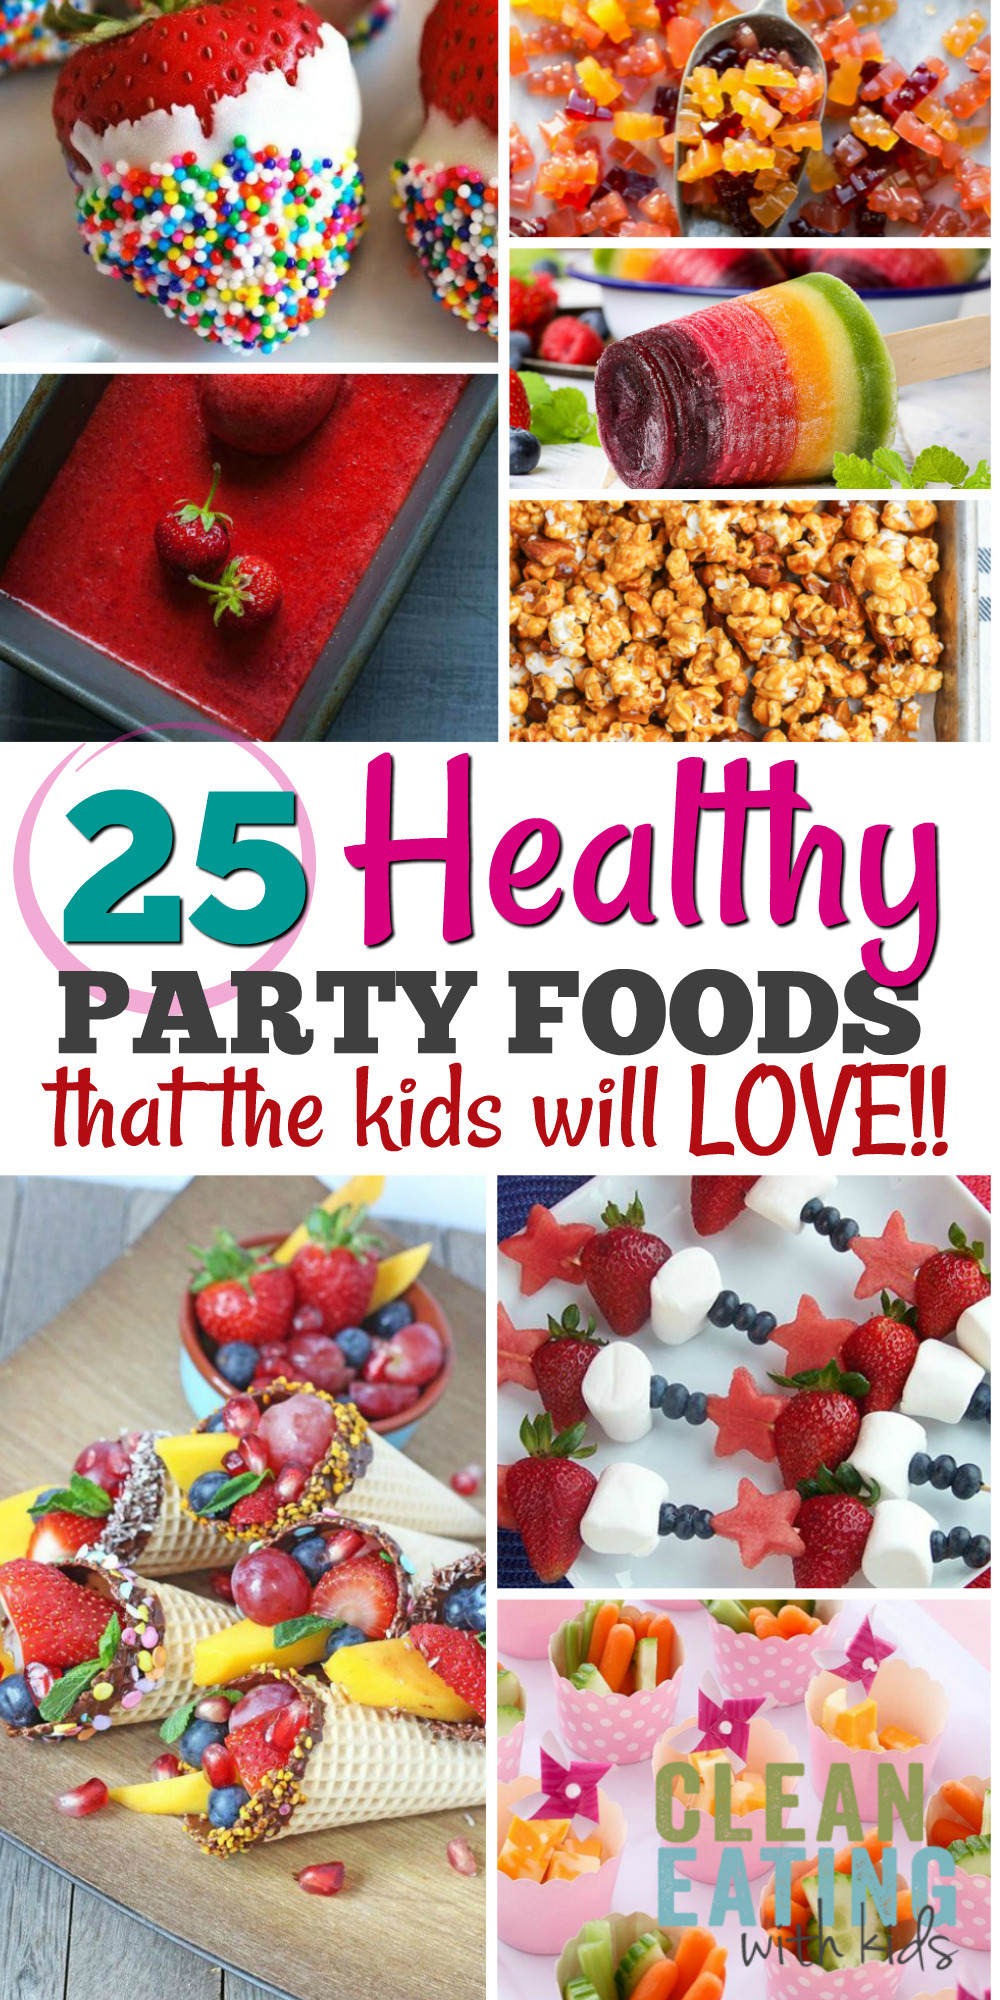 Food Ideas For Kids Birthday Party
 25 Healthy Birthday Party Food Ideas Clean Eating with kids